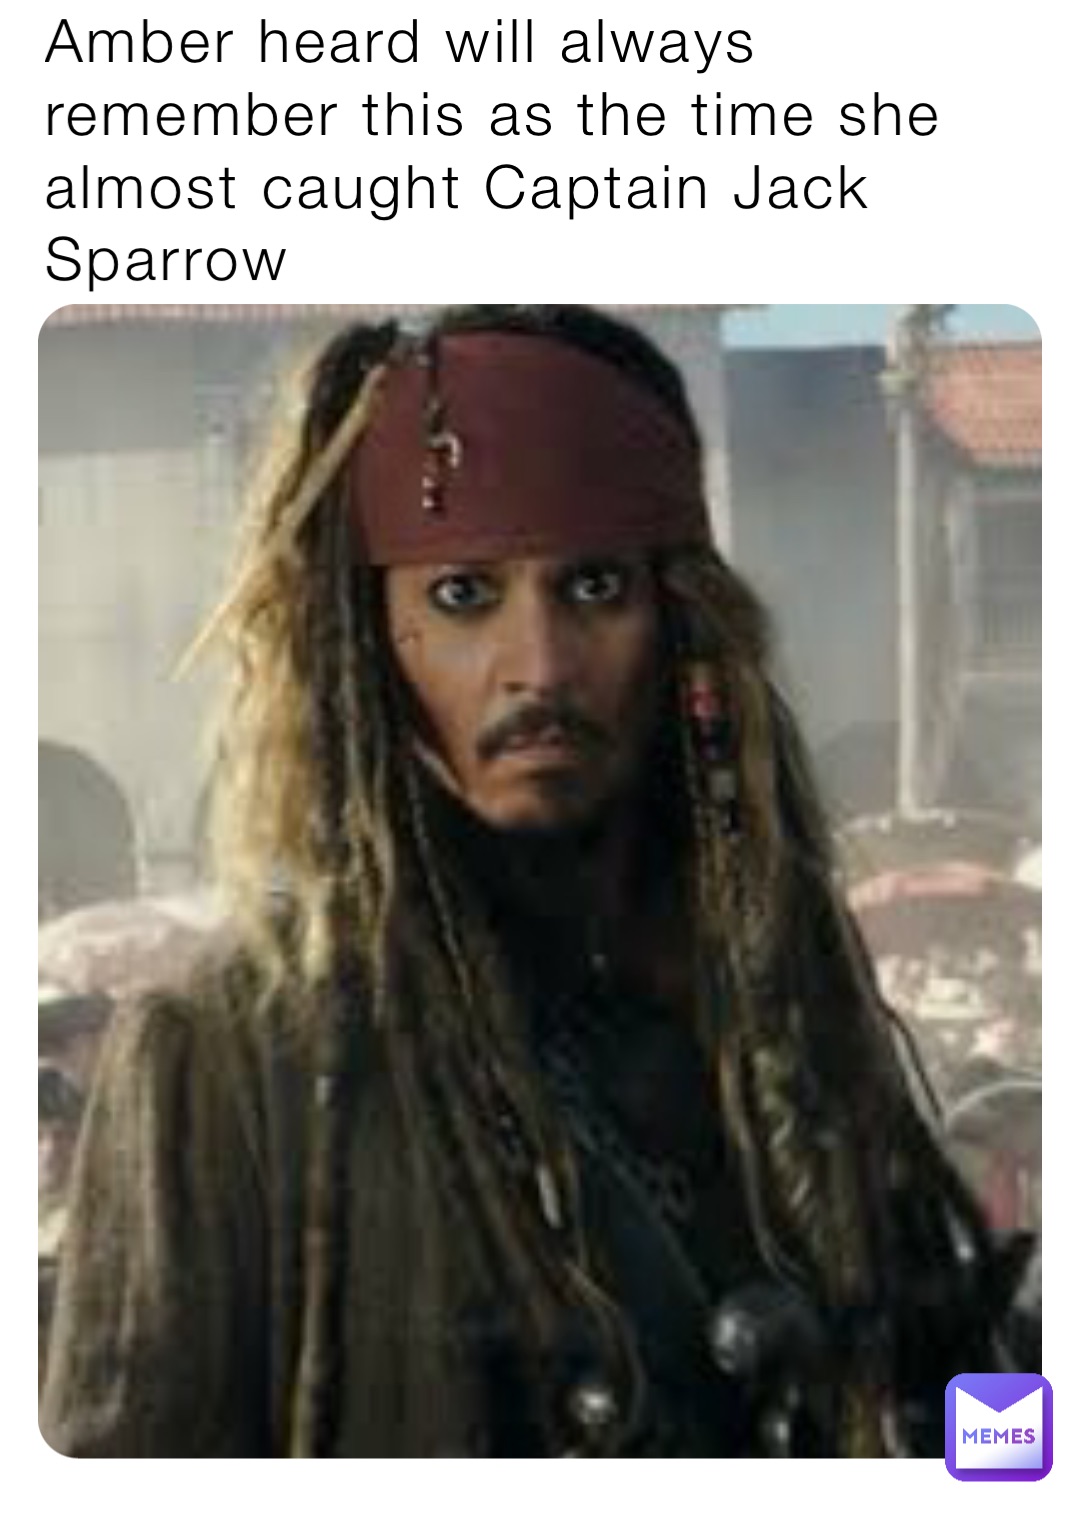 Amber heard will always remember this as the time she almost caught Captain Jack Sparrow